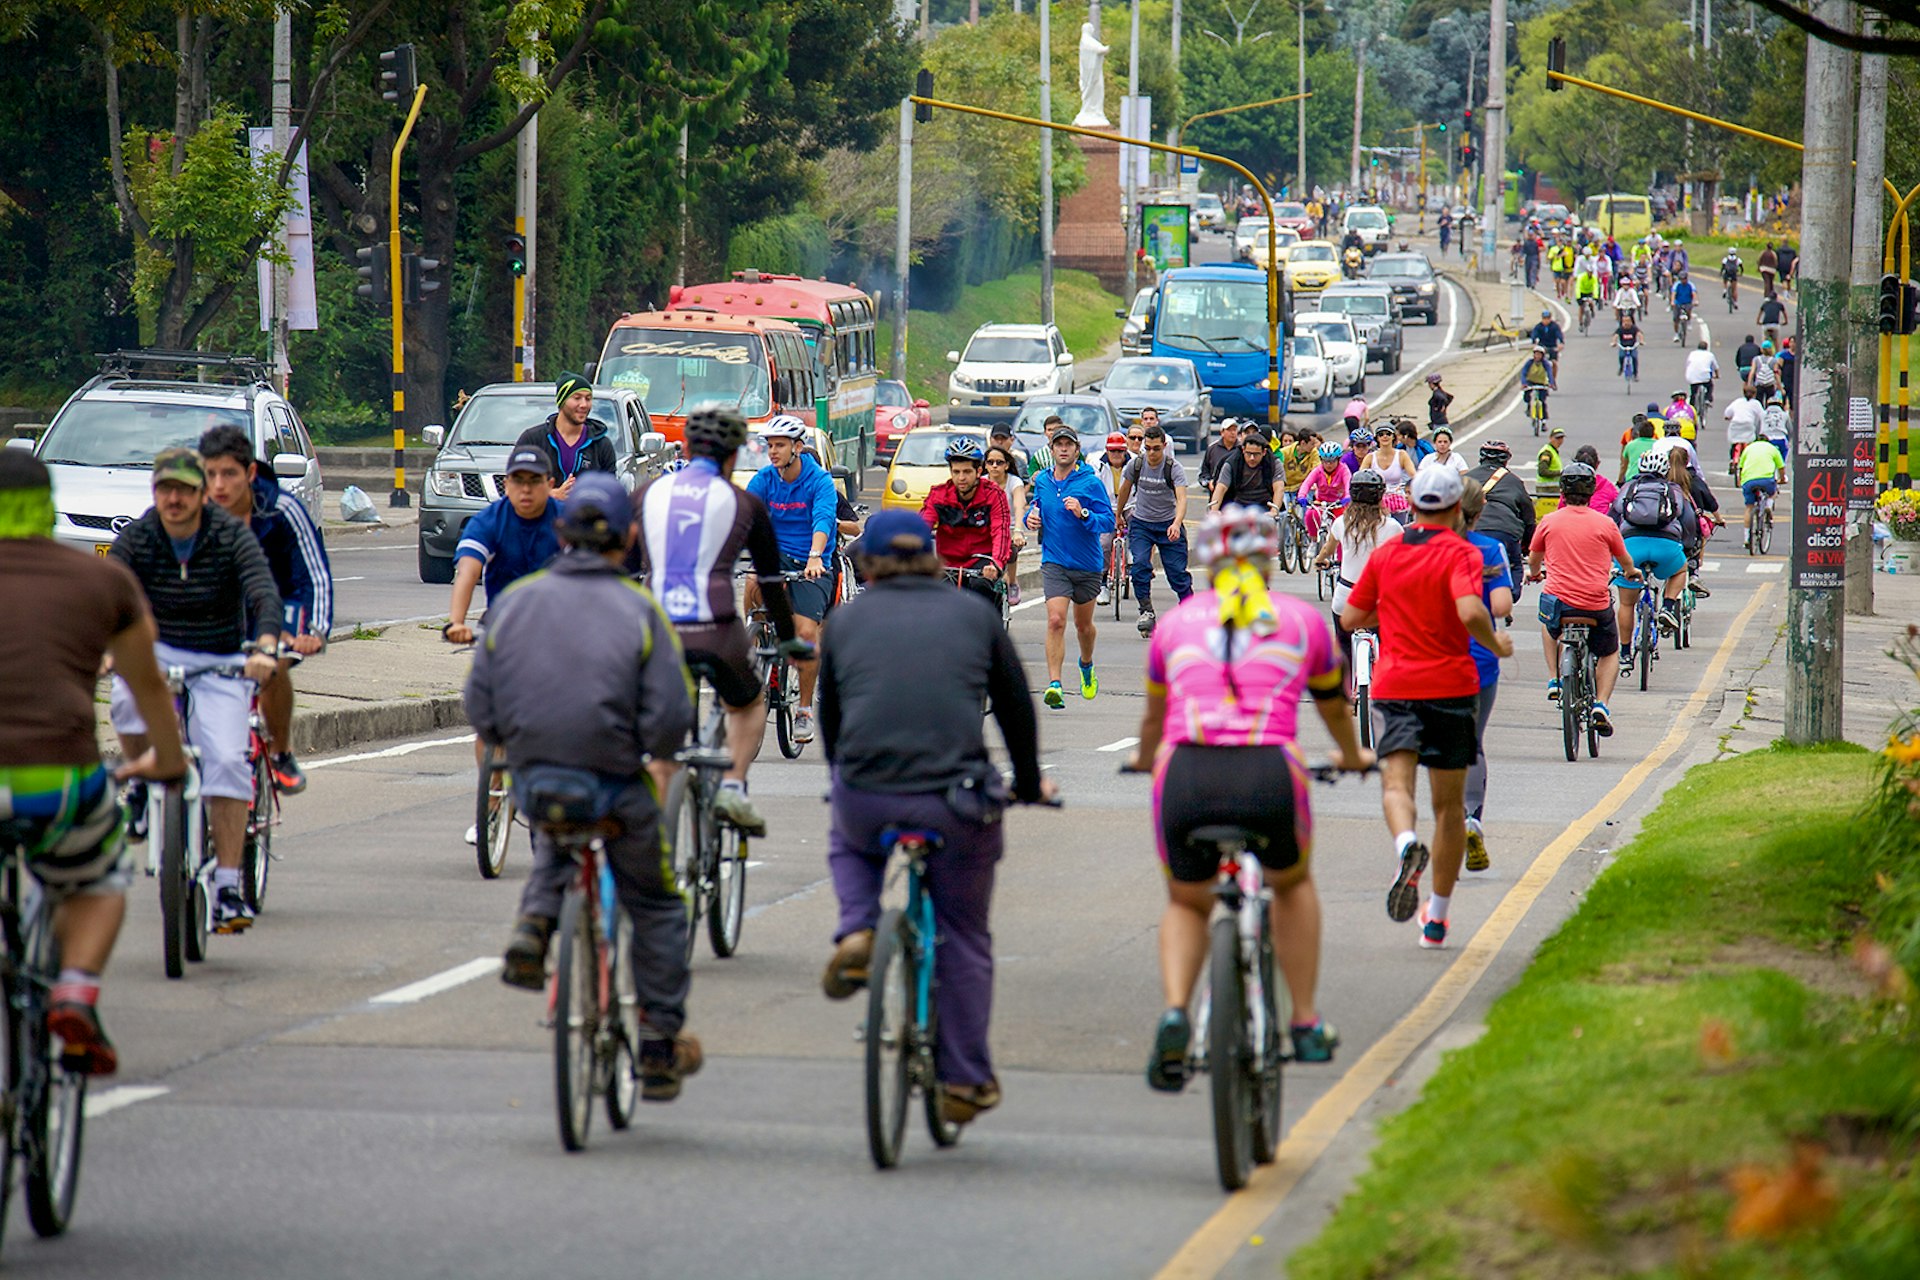 Cyclists and runners fill one side of a road in Bogotá © Ivan_Sabo / Getty Images